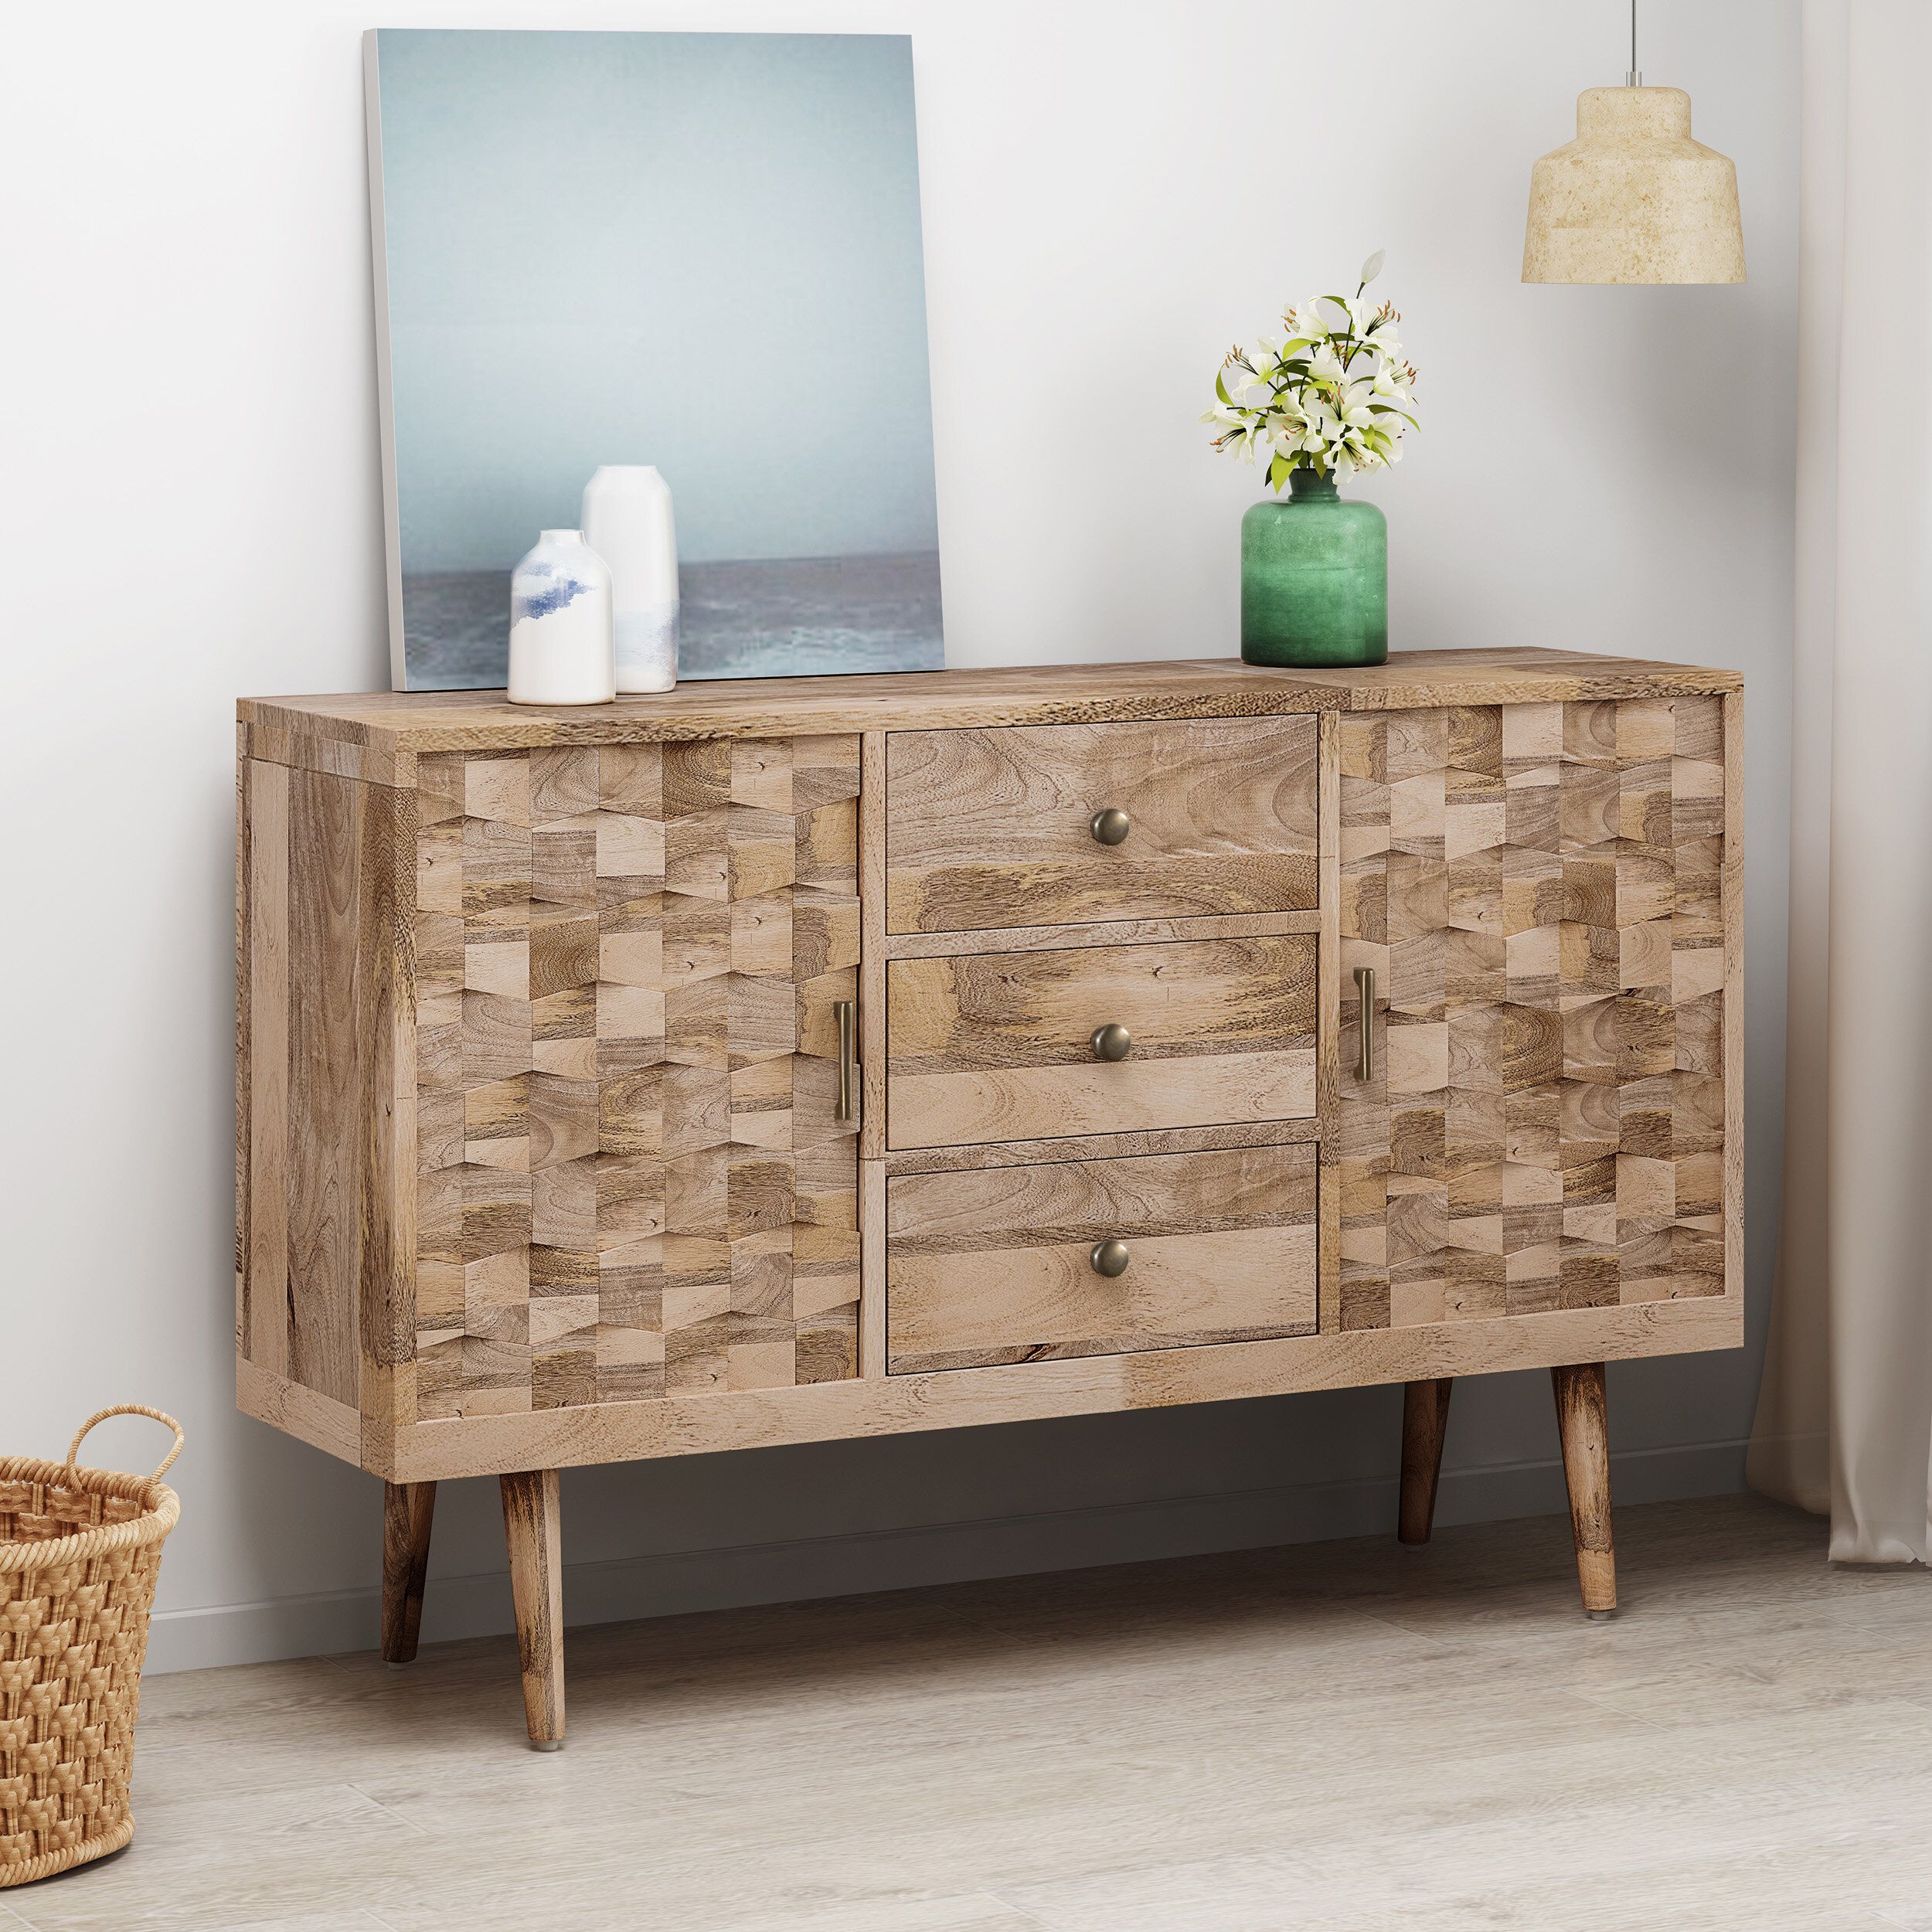 4 Drawer Sideboard | Wayfair For Most Popular Drummond 4 Drawer Sideboards (View 11 of 20)